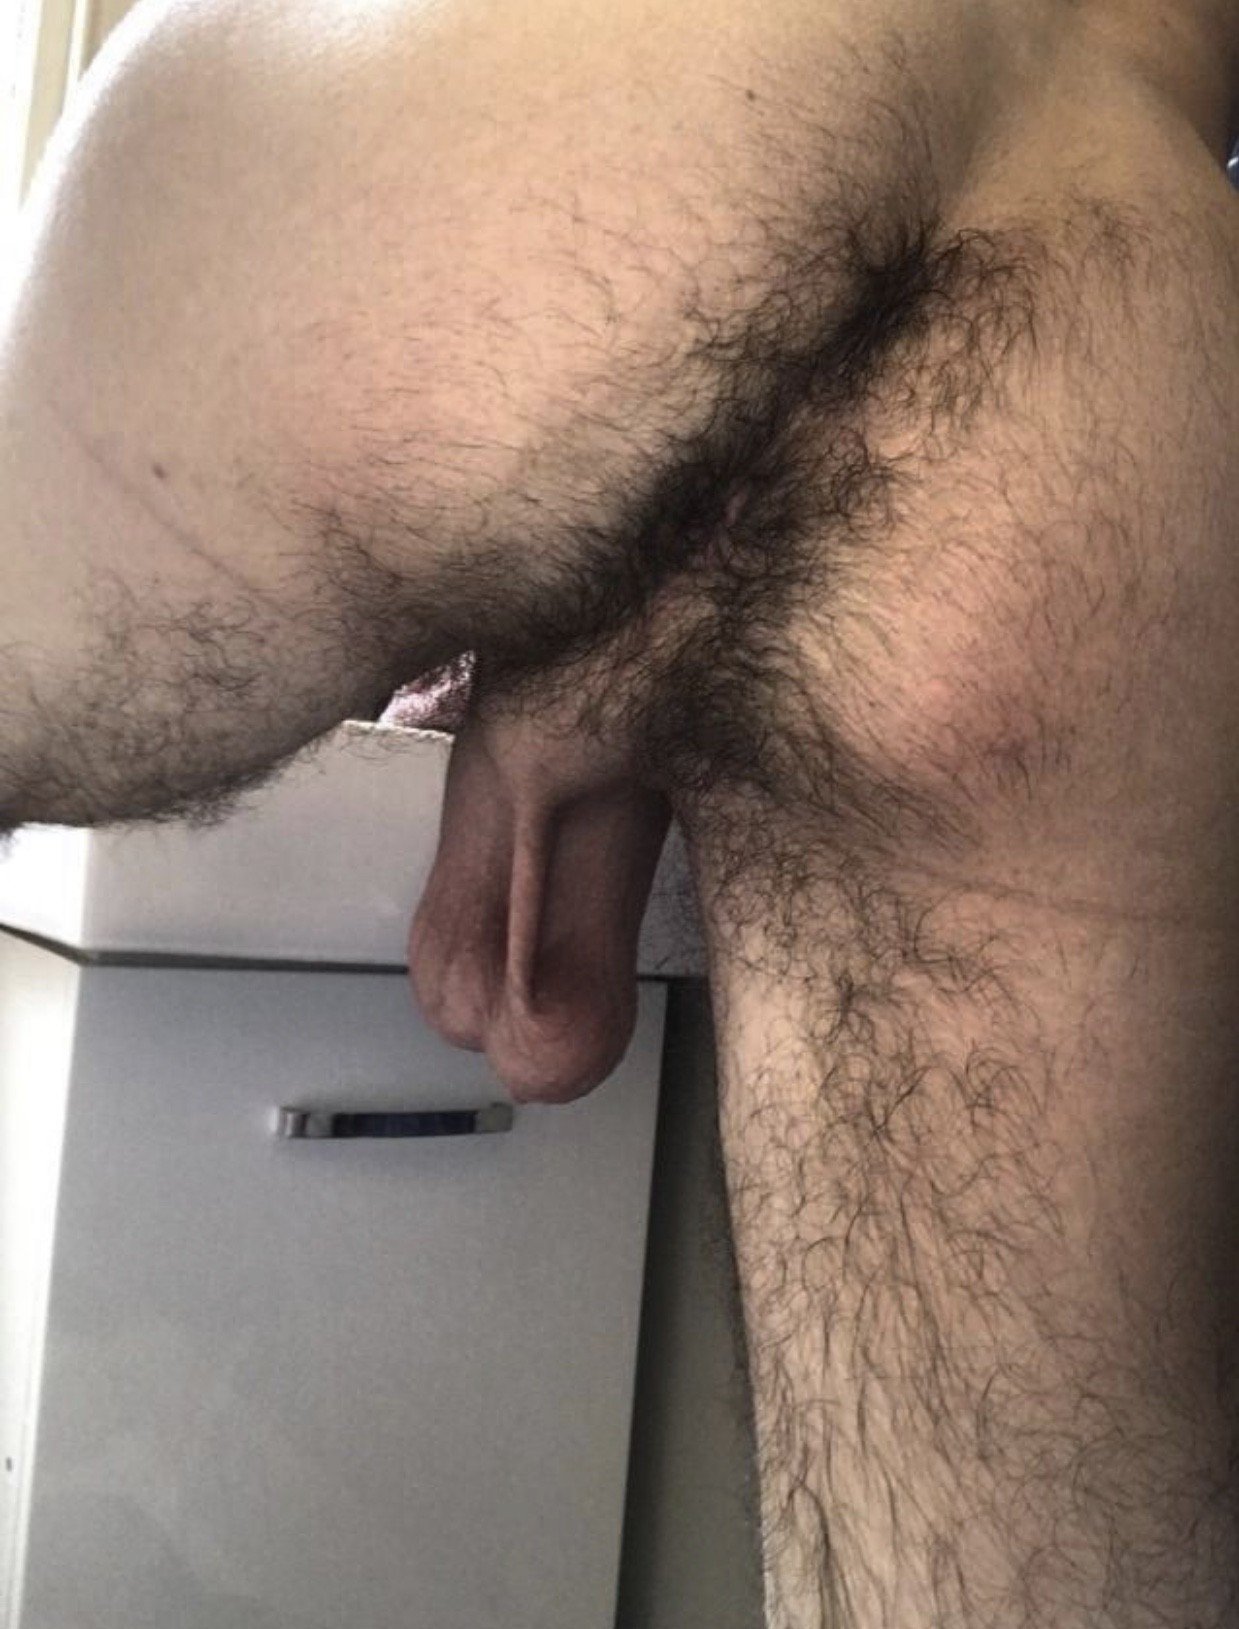 Photo by LeFoutre with the username @LeFoutre,  December 14, 2018 at 12:10 AM. The post is about the topic Gay male ass and the text says 'Greatest ass ever ... hairy peach with amazing low hangers.  Absolutely perfect!'